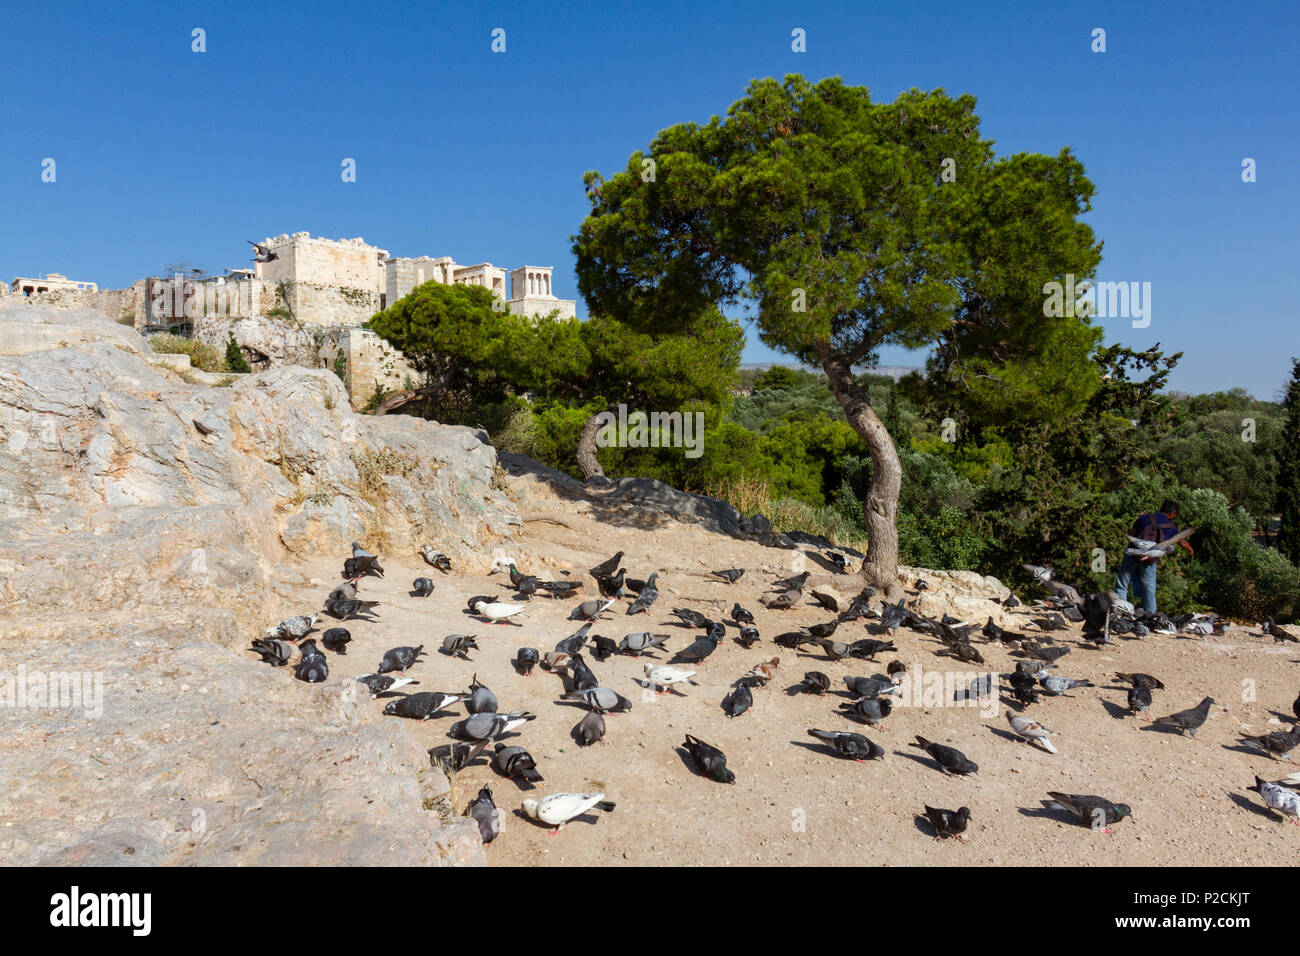 Pigeons sitting on a rock across the rock of the Acropolis of Athens in Greece Stock Photo